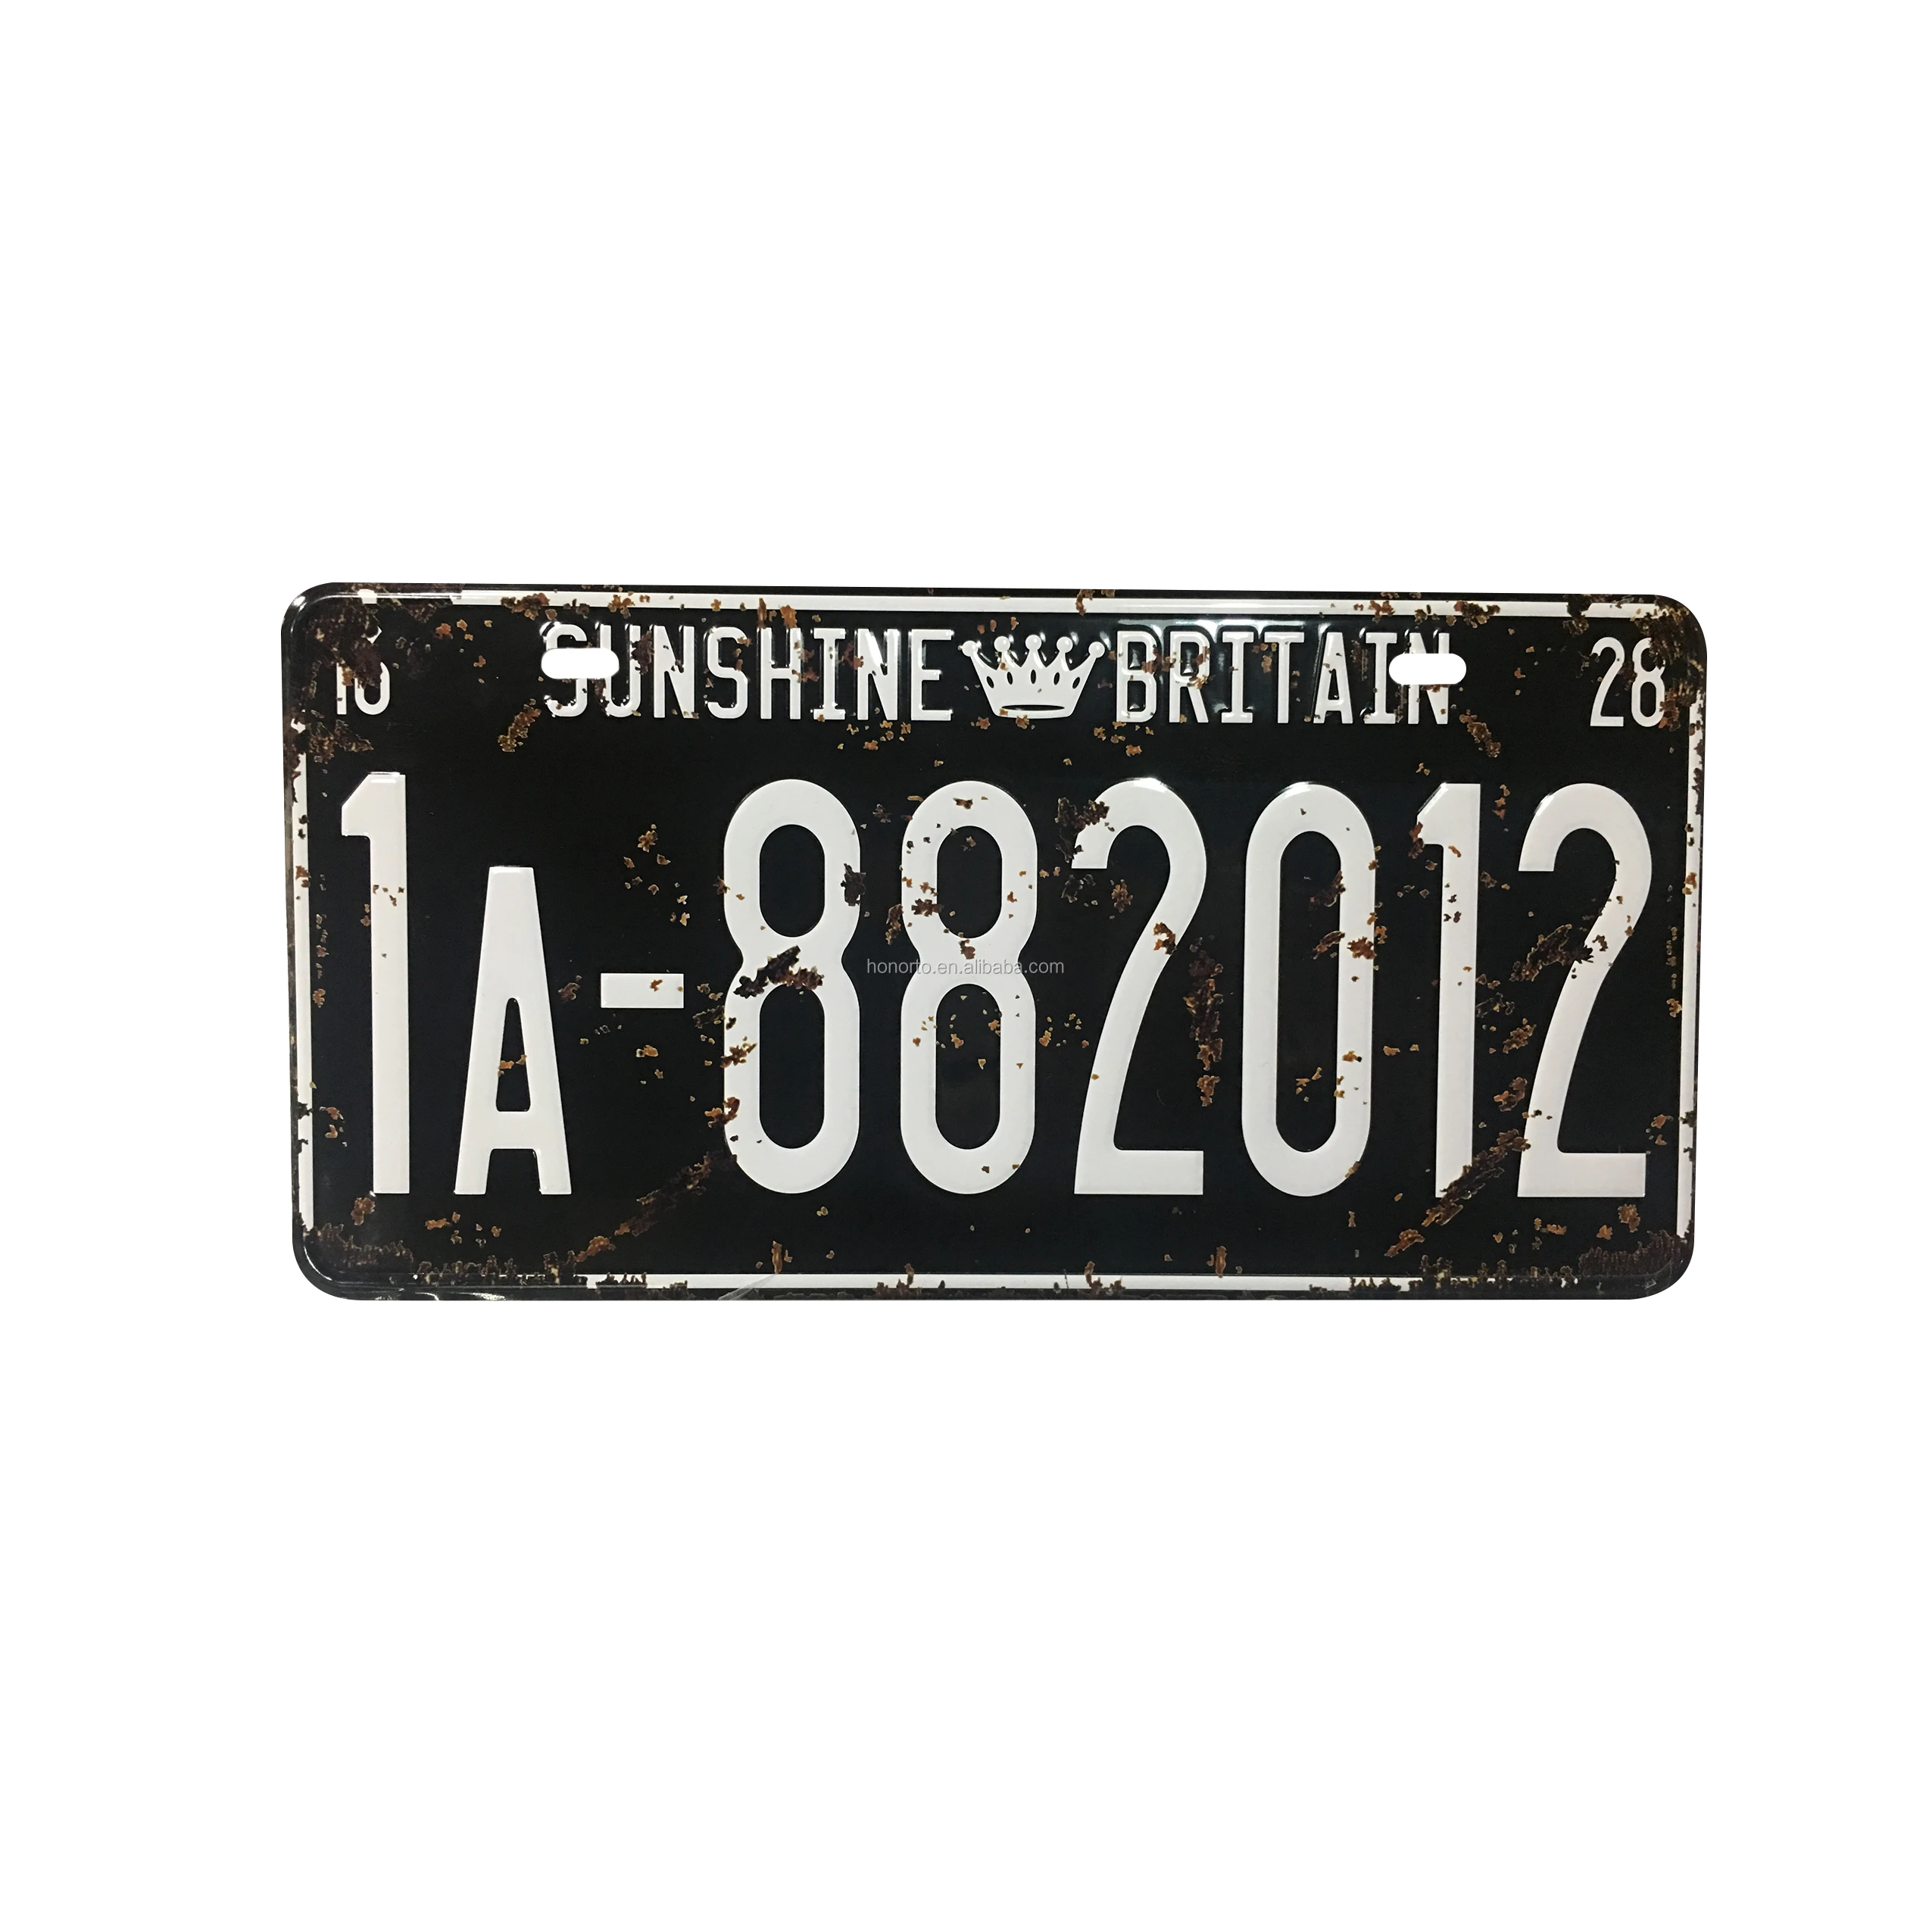 Professional Customized Car License Number Plate